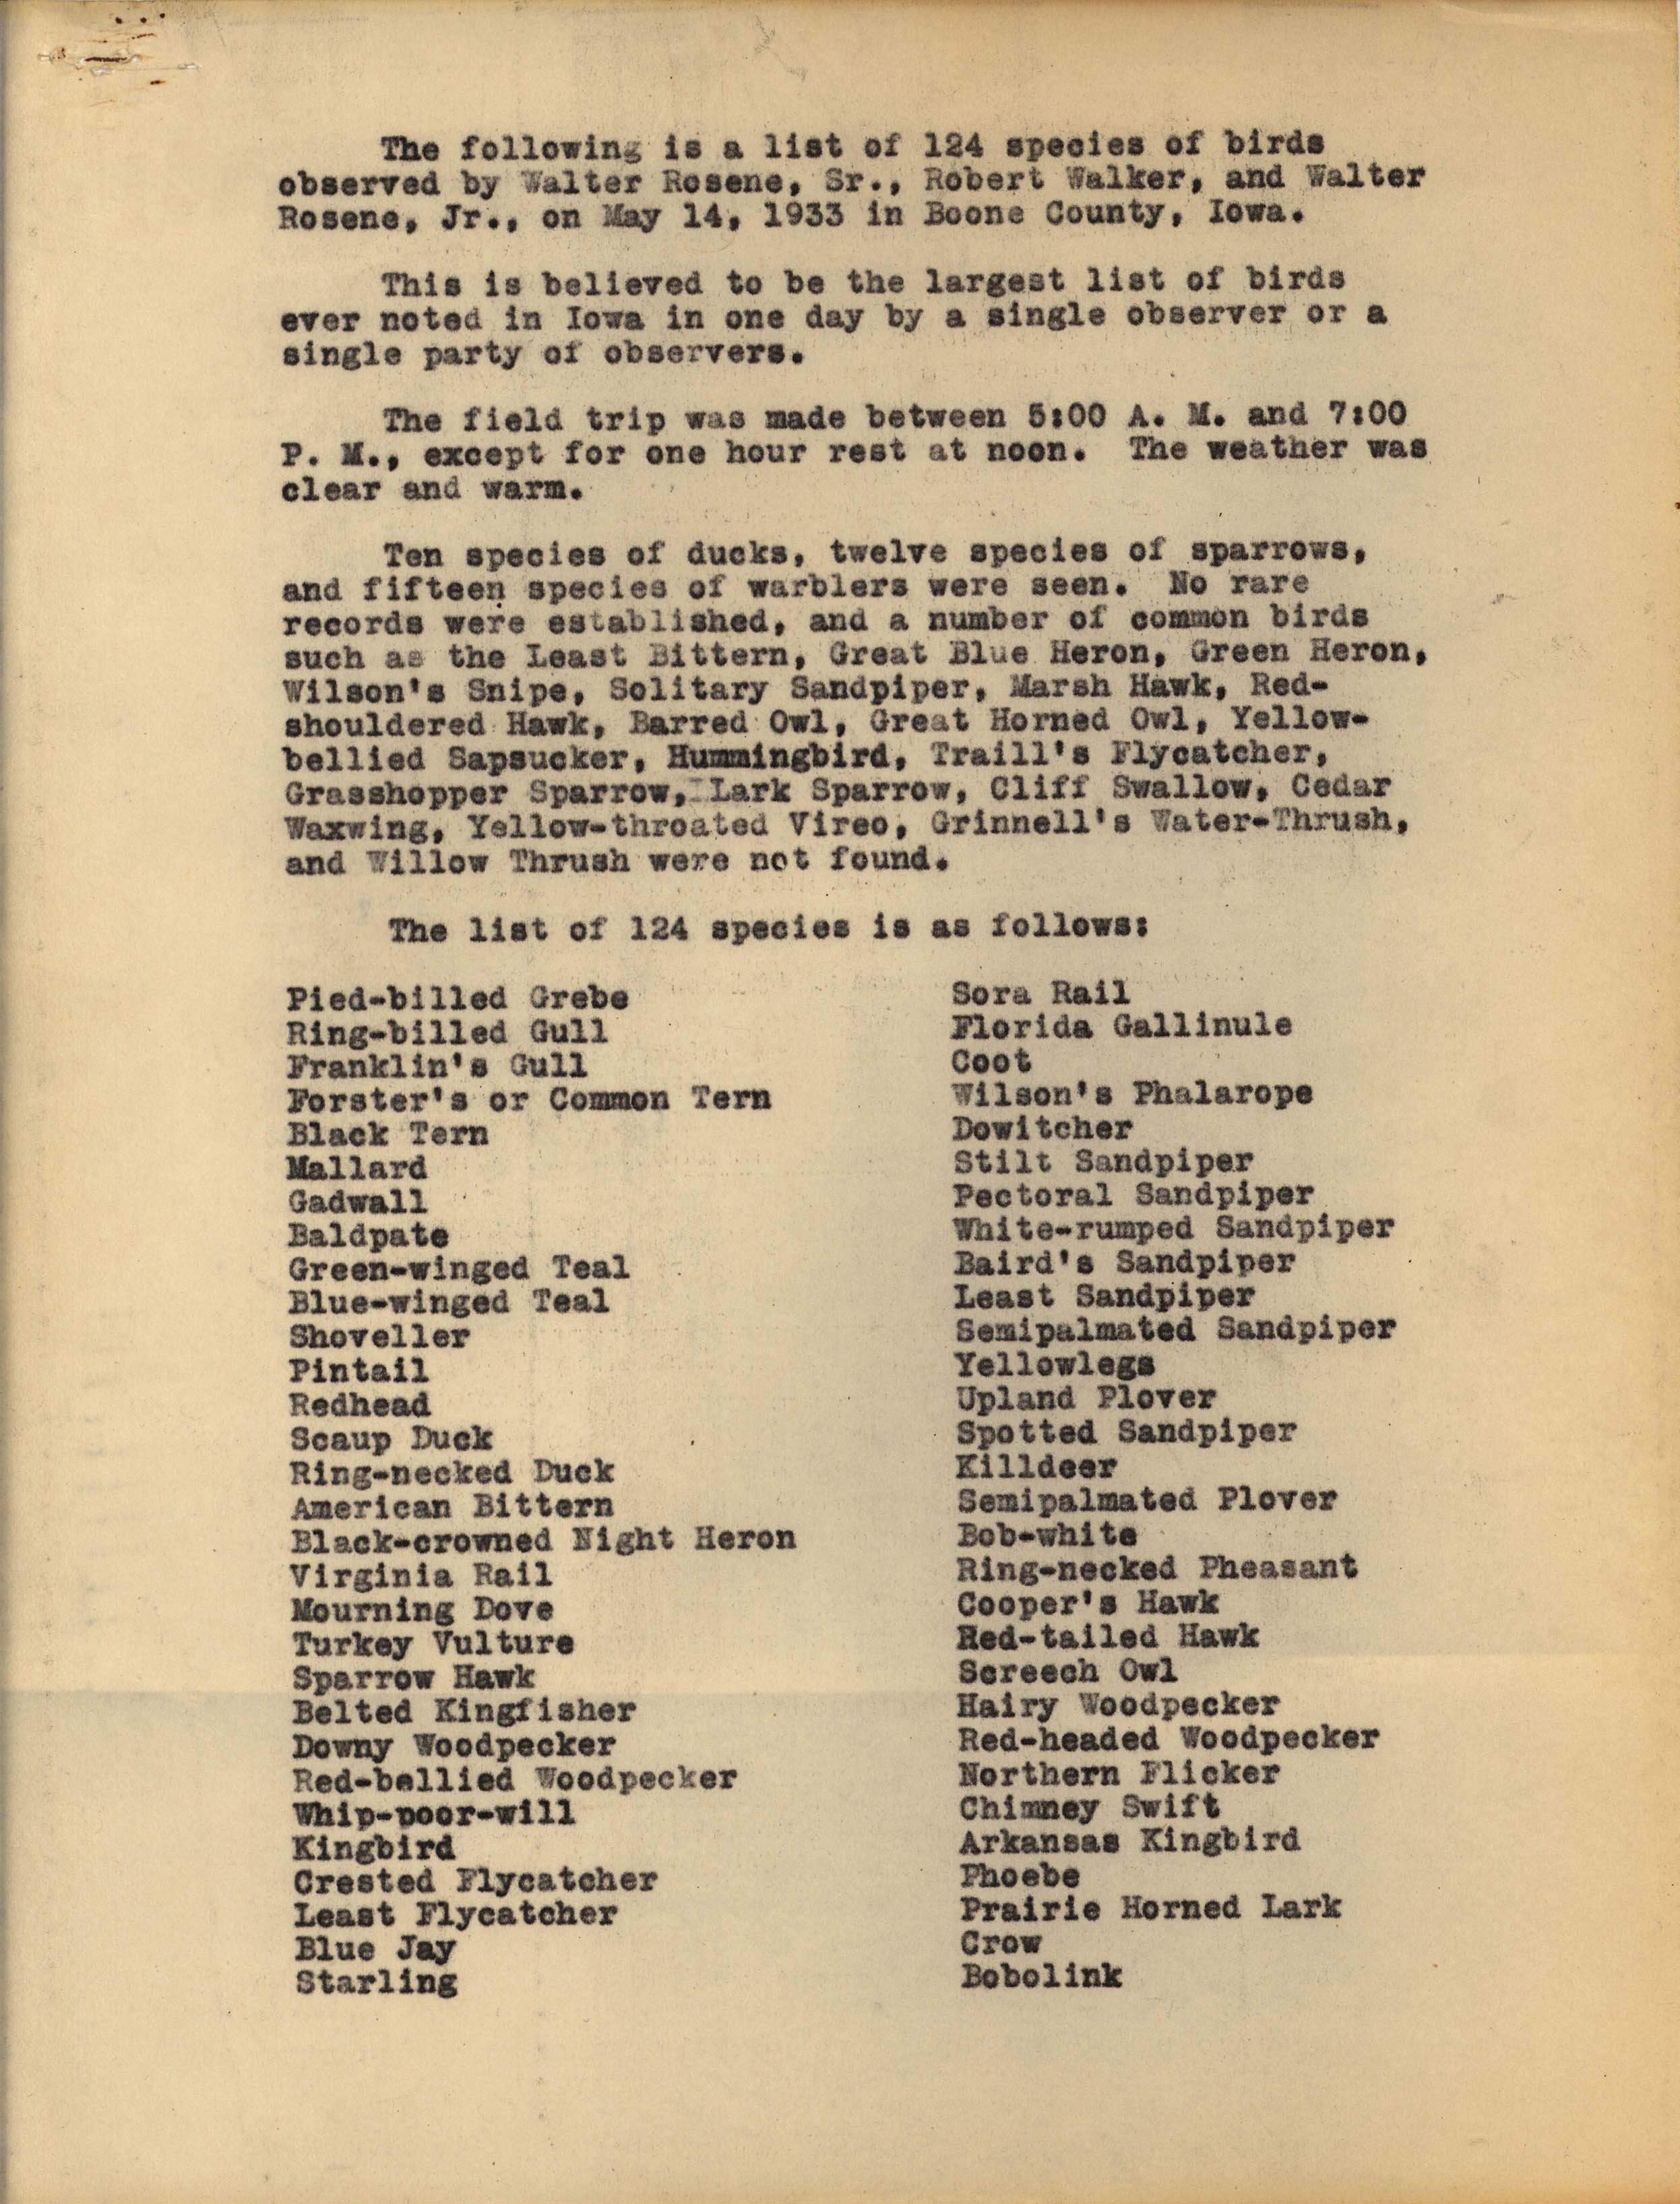 List of bird sighted in Boone County on May 14, 1933